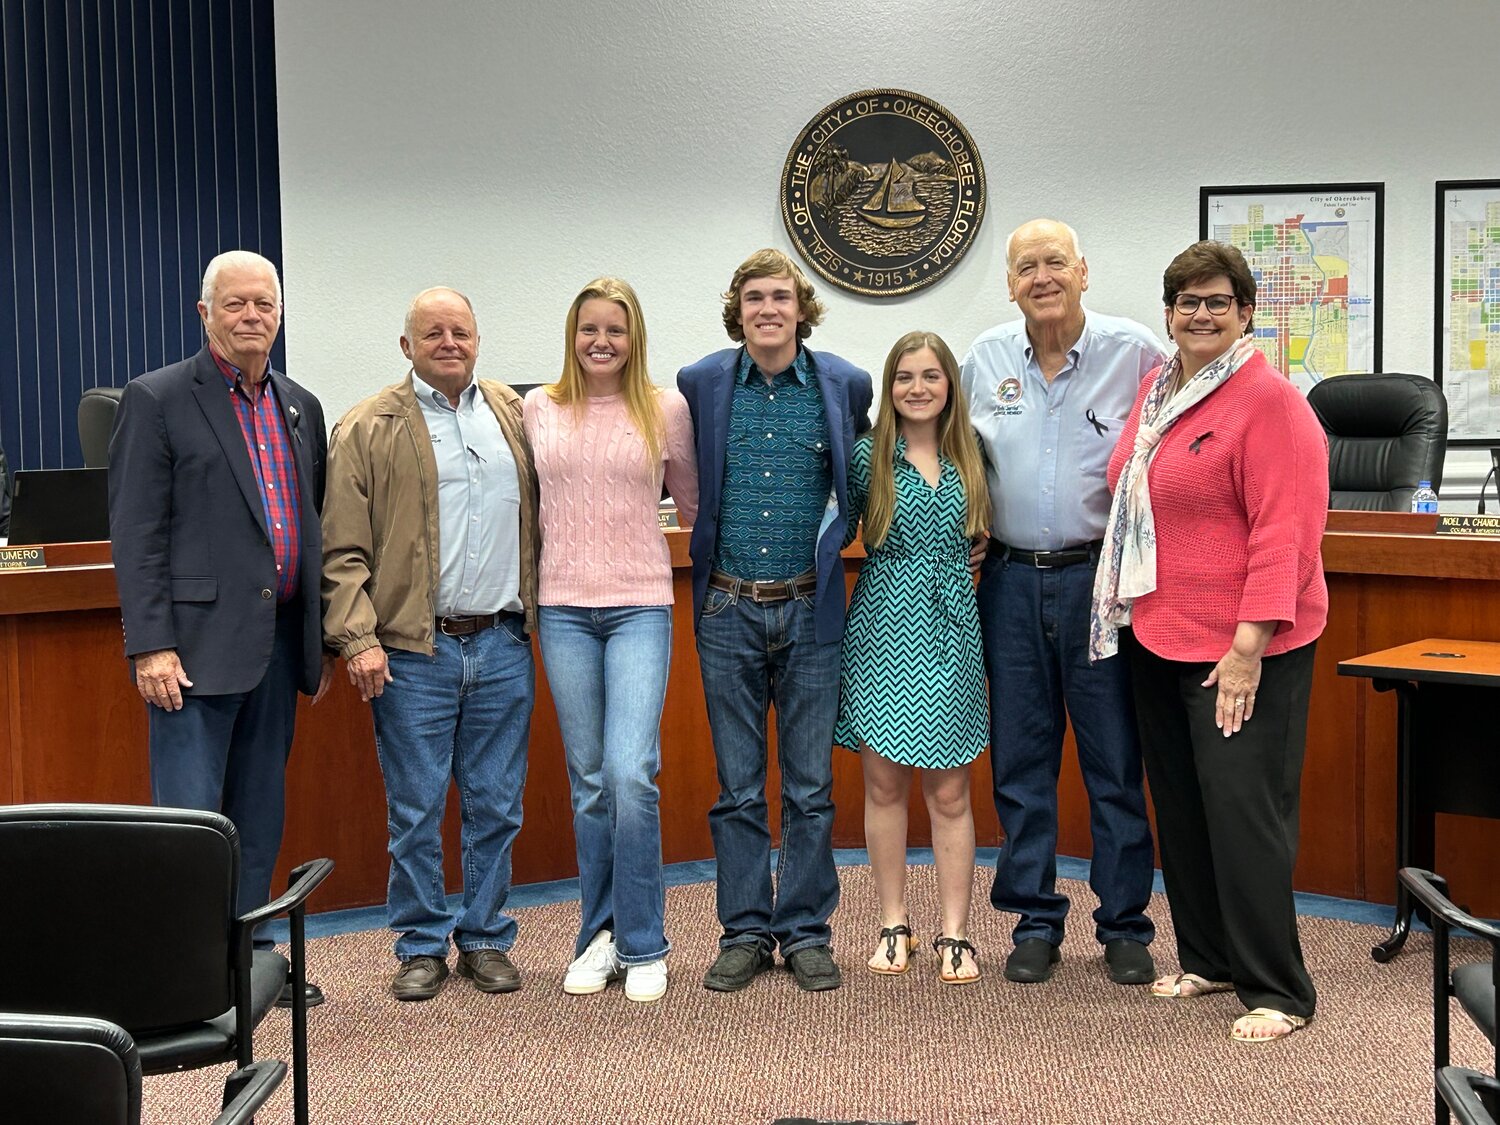 OKEECHOBEE — During its Feb. 6 meeting, the Okeechobee City Council recognized four teens who have been awarded scholarships by the South Florida Fair. Congratulations to Luke Larson, Lilly Maxwell, Paisley Norman and Tess D'Ariano. The teens, with the exception of Paisley, who was unable to make the meeting, are pictured with the city council members. Council Member David McAuley was unable to attend the meeting as he is on a trip to Alaska with his wife Sandra Pearce.